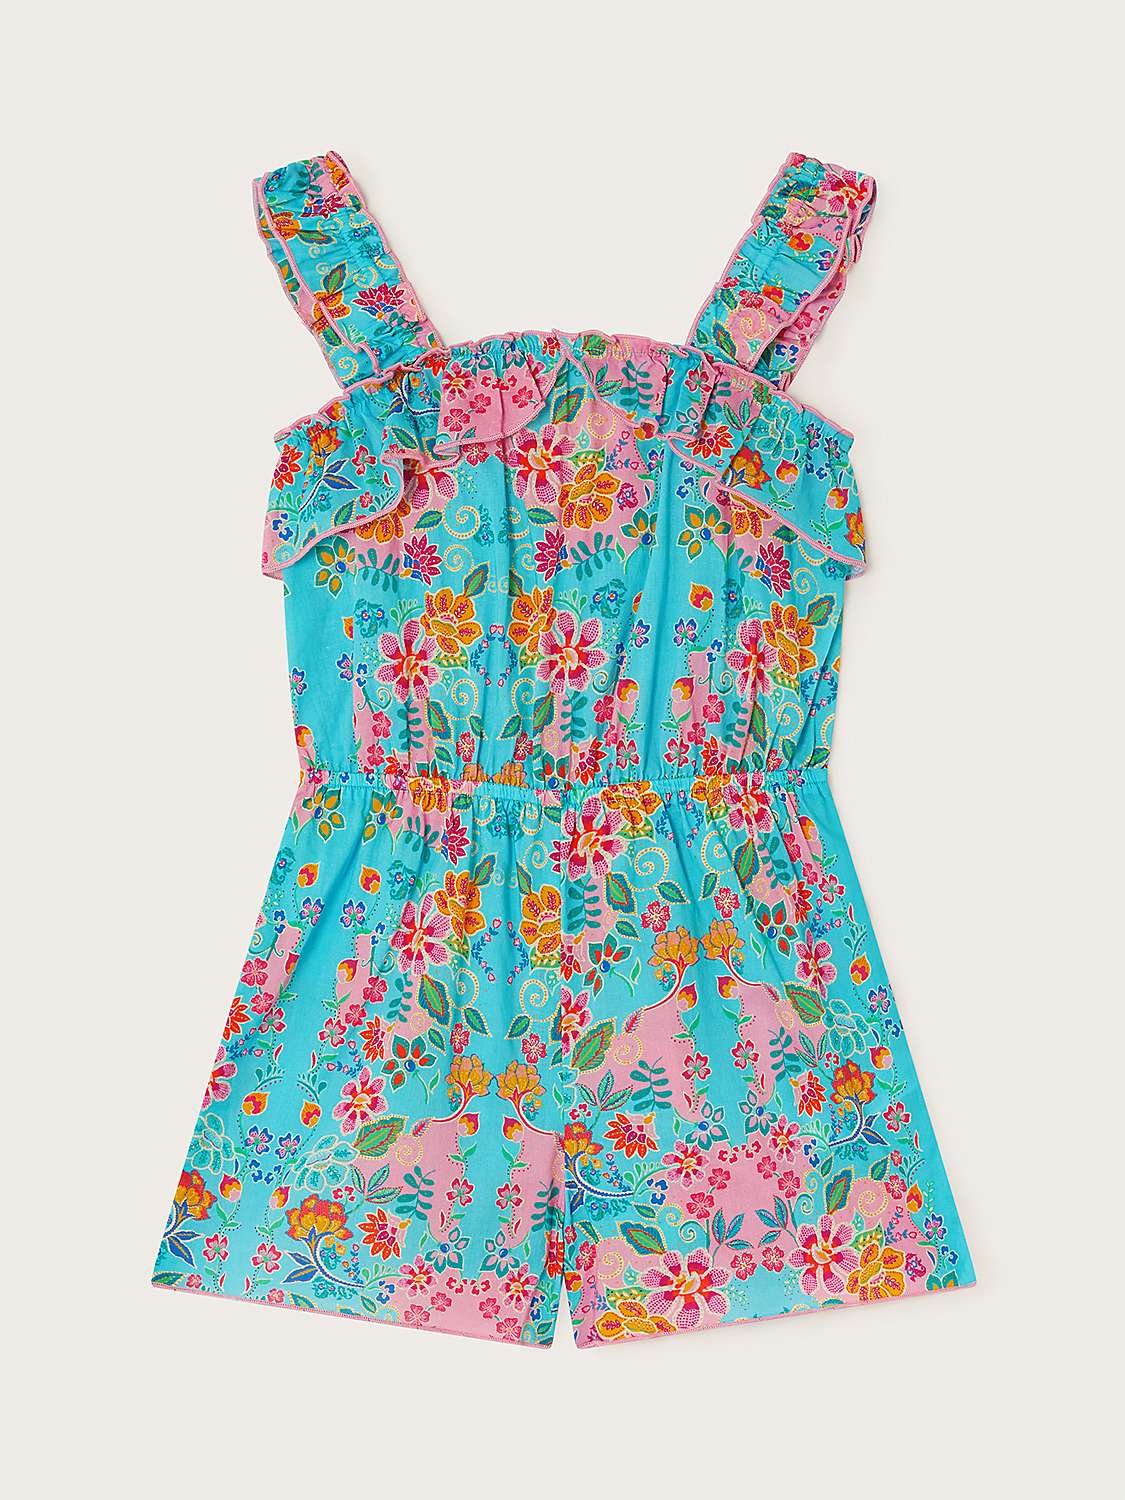 Buy Monsoon Kids' Floral Print Frill Detail Playsuit, Turquoise Online at johnlewis.com